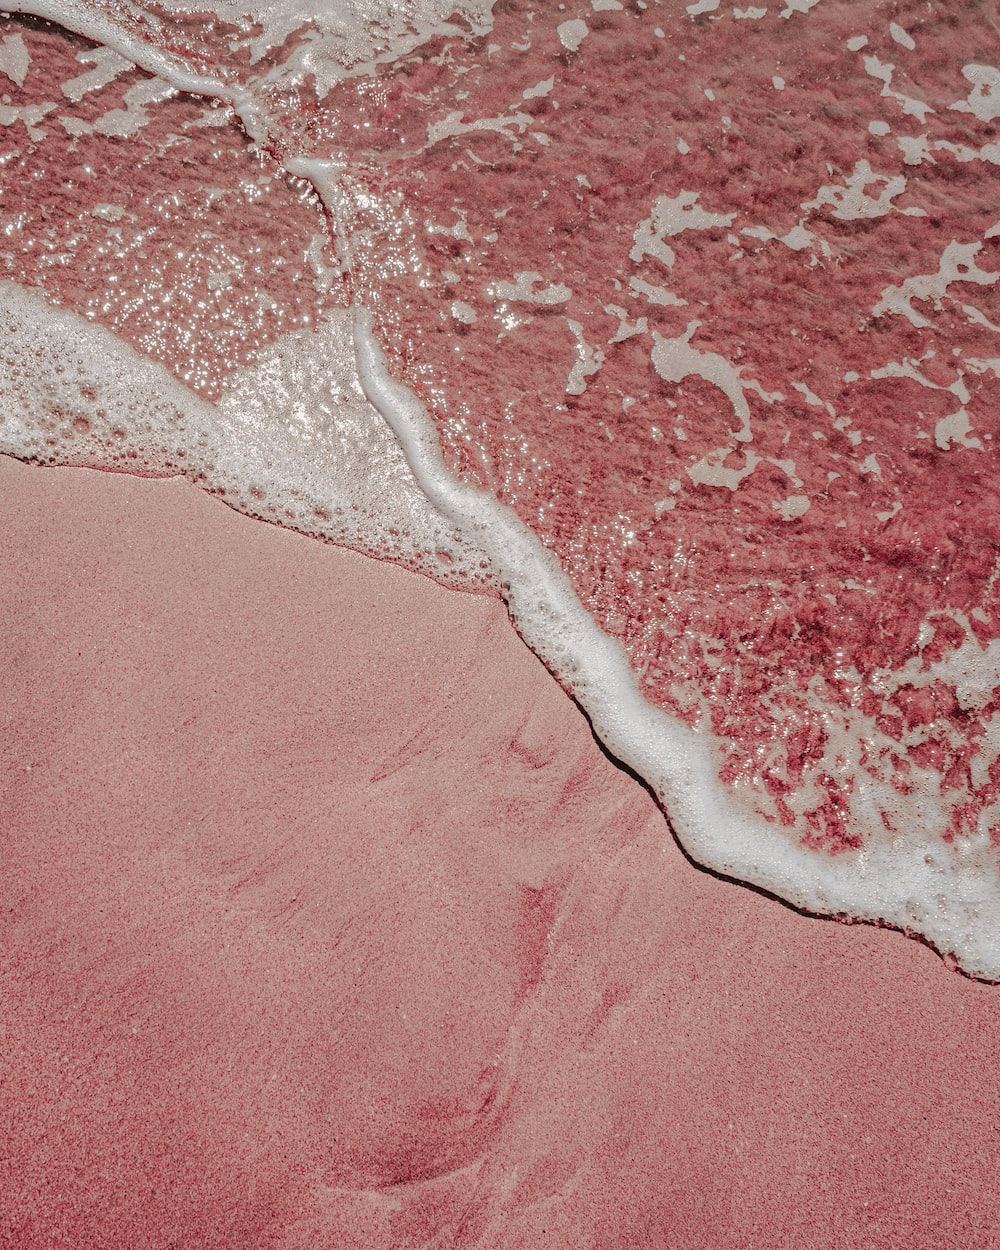 A pink sand beach with white sea foam. - Hot pink